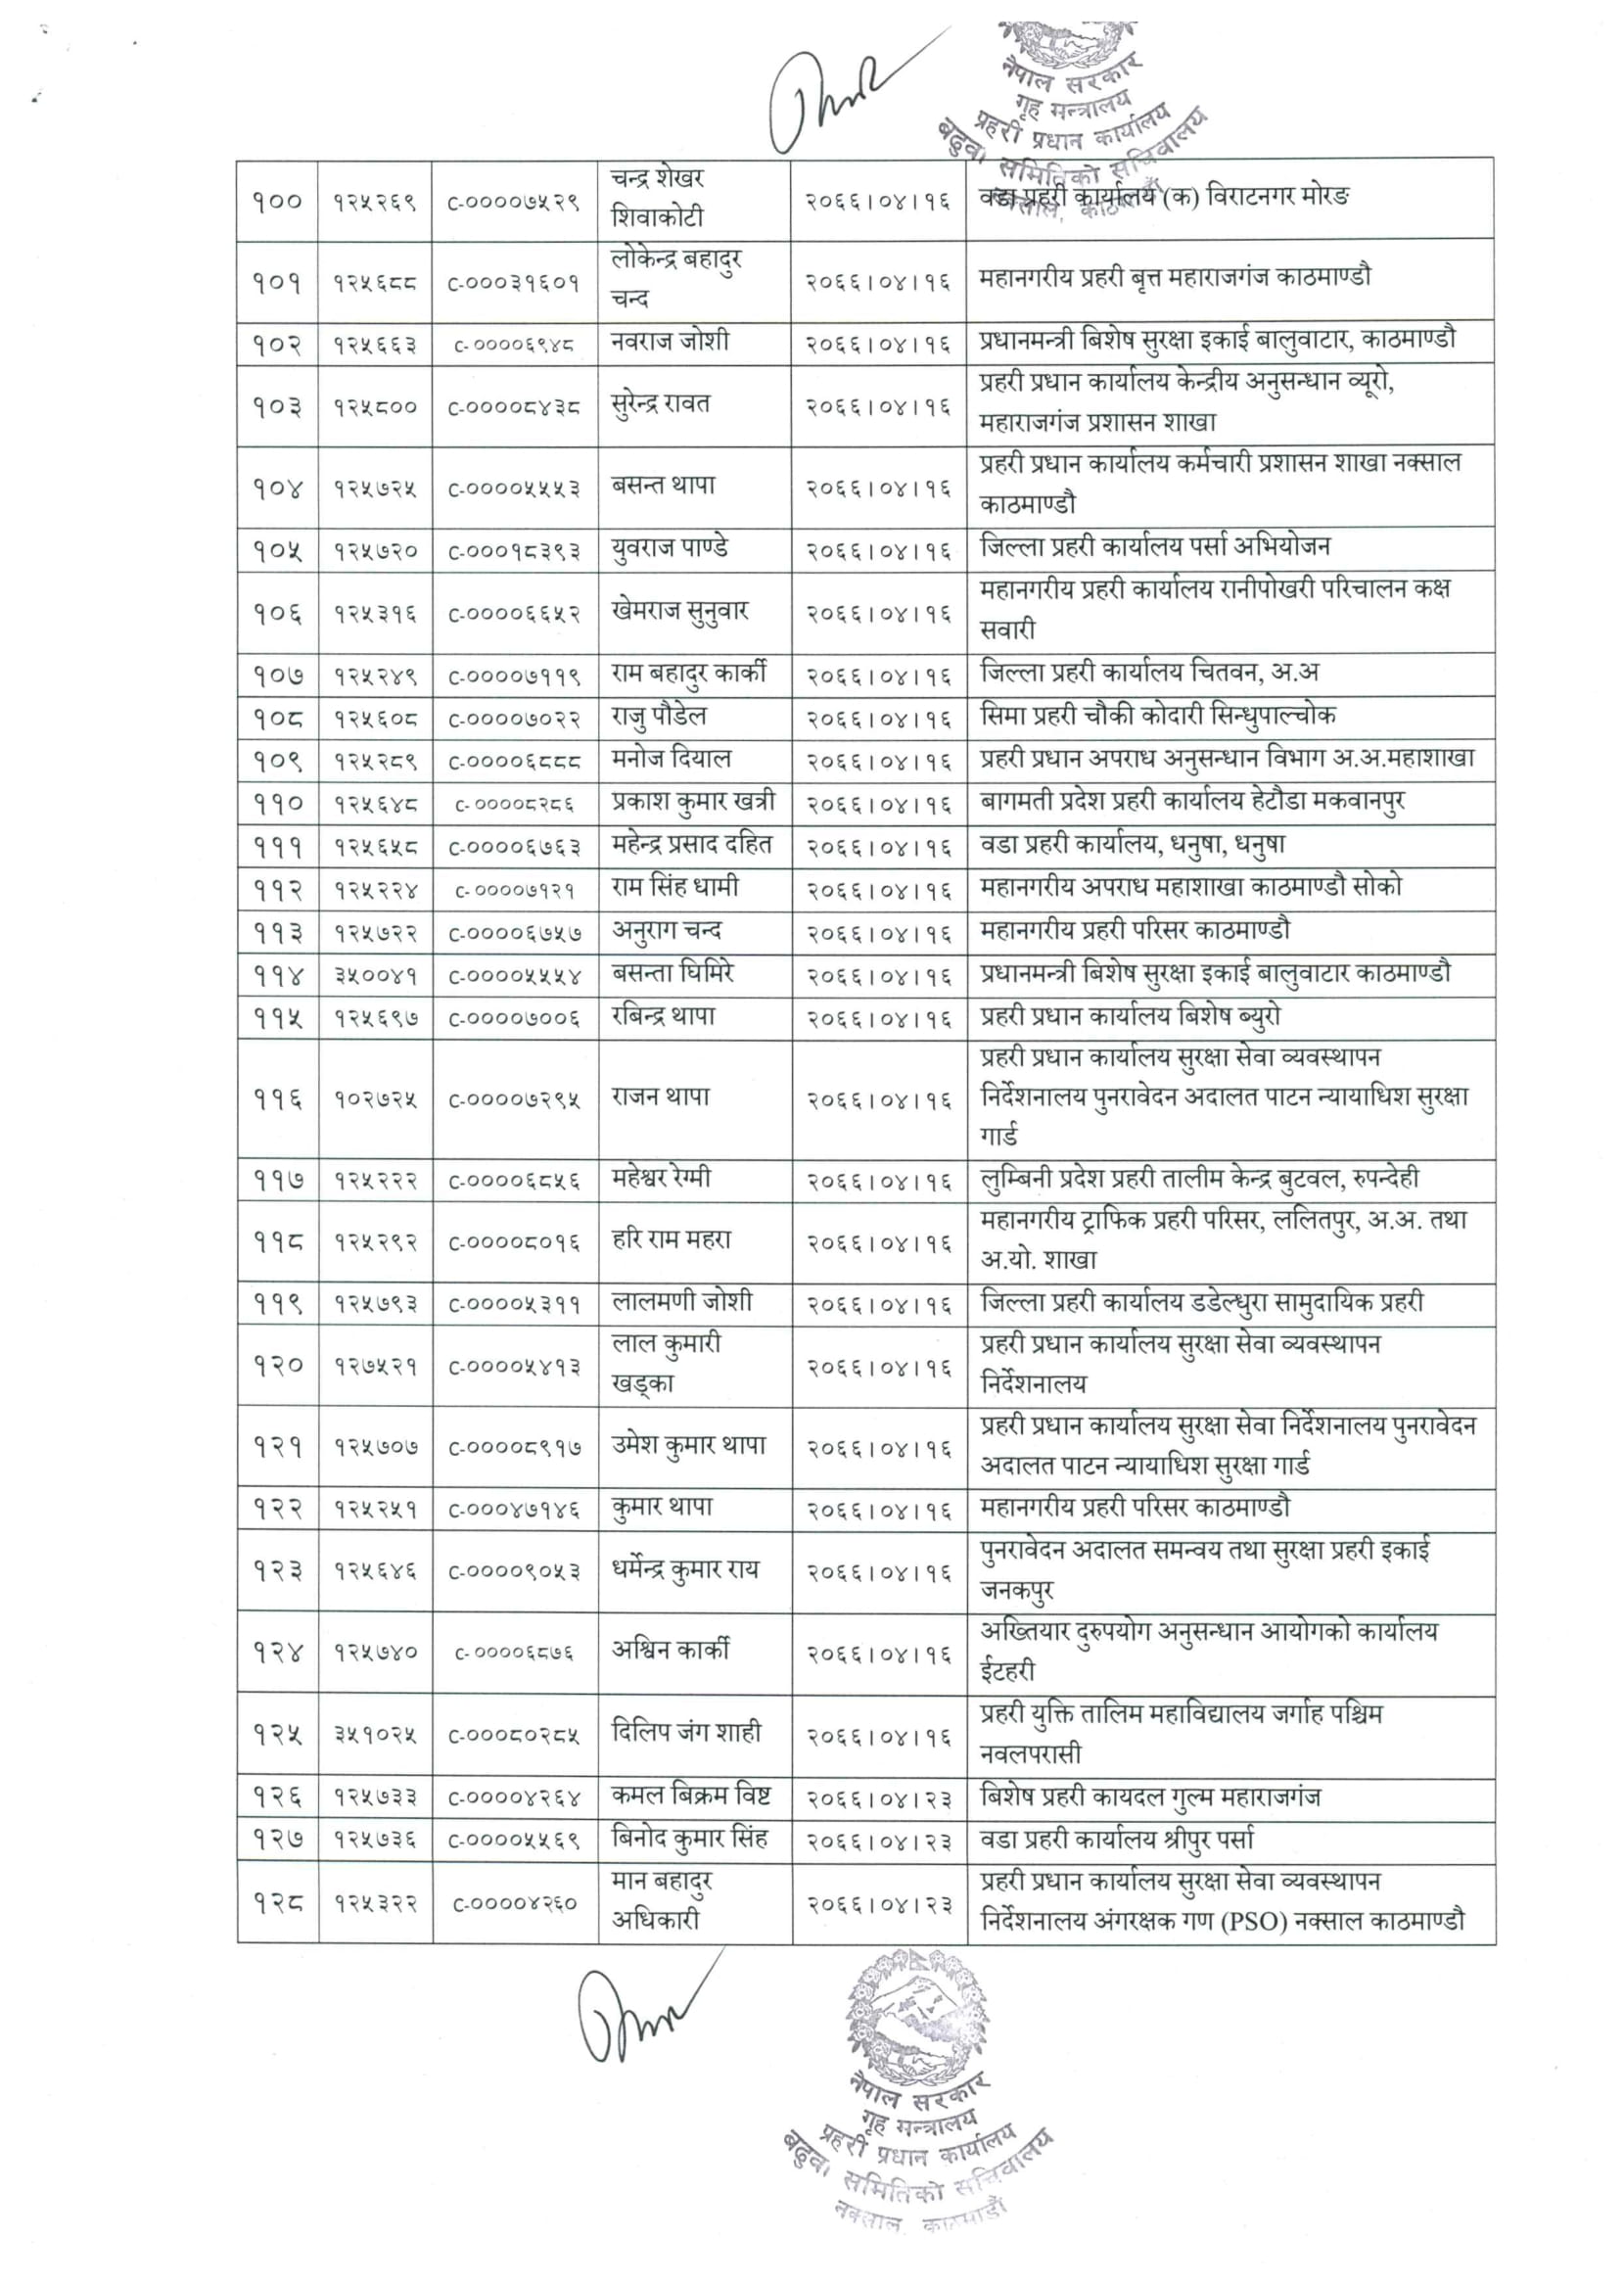 Nepal Police SSI 2078-12-11 Promotion Recommend List